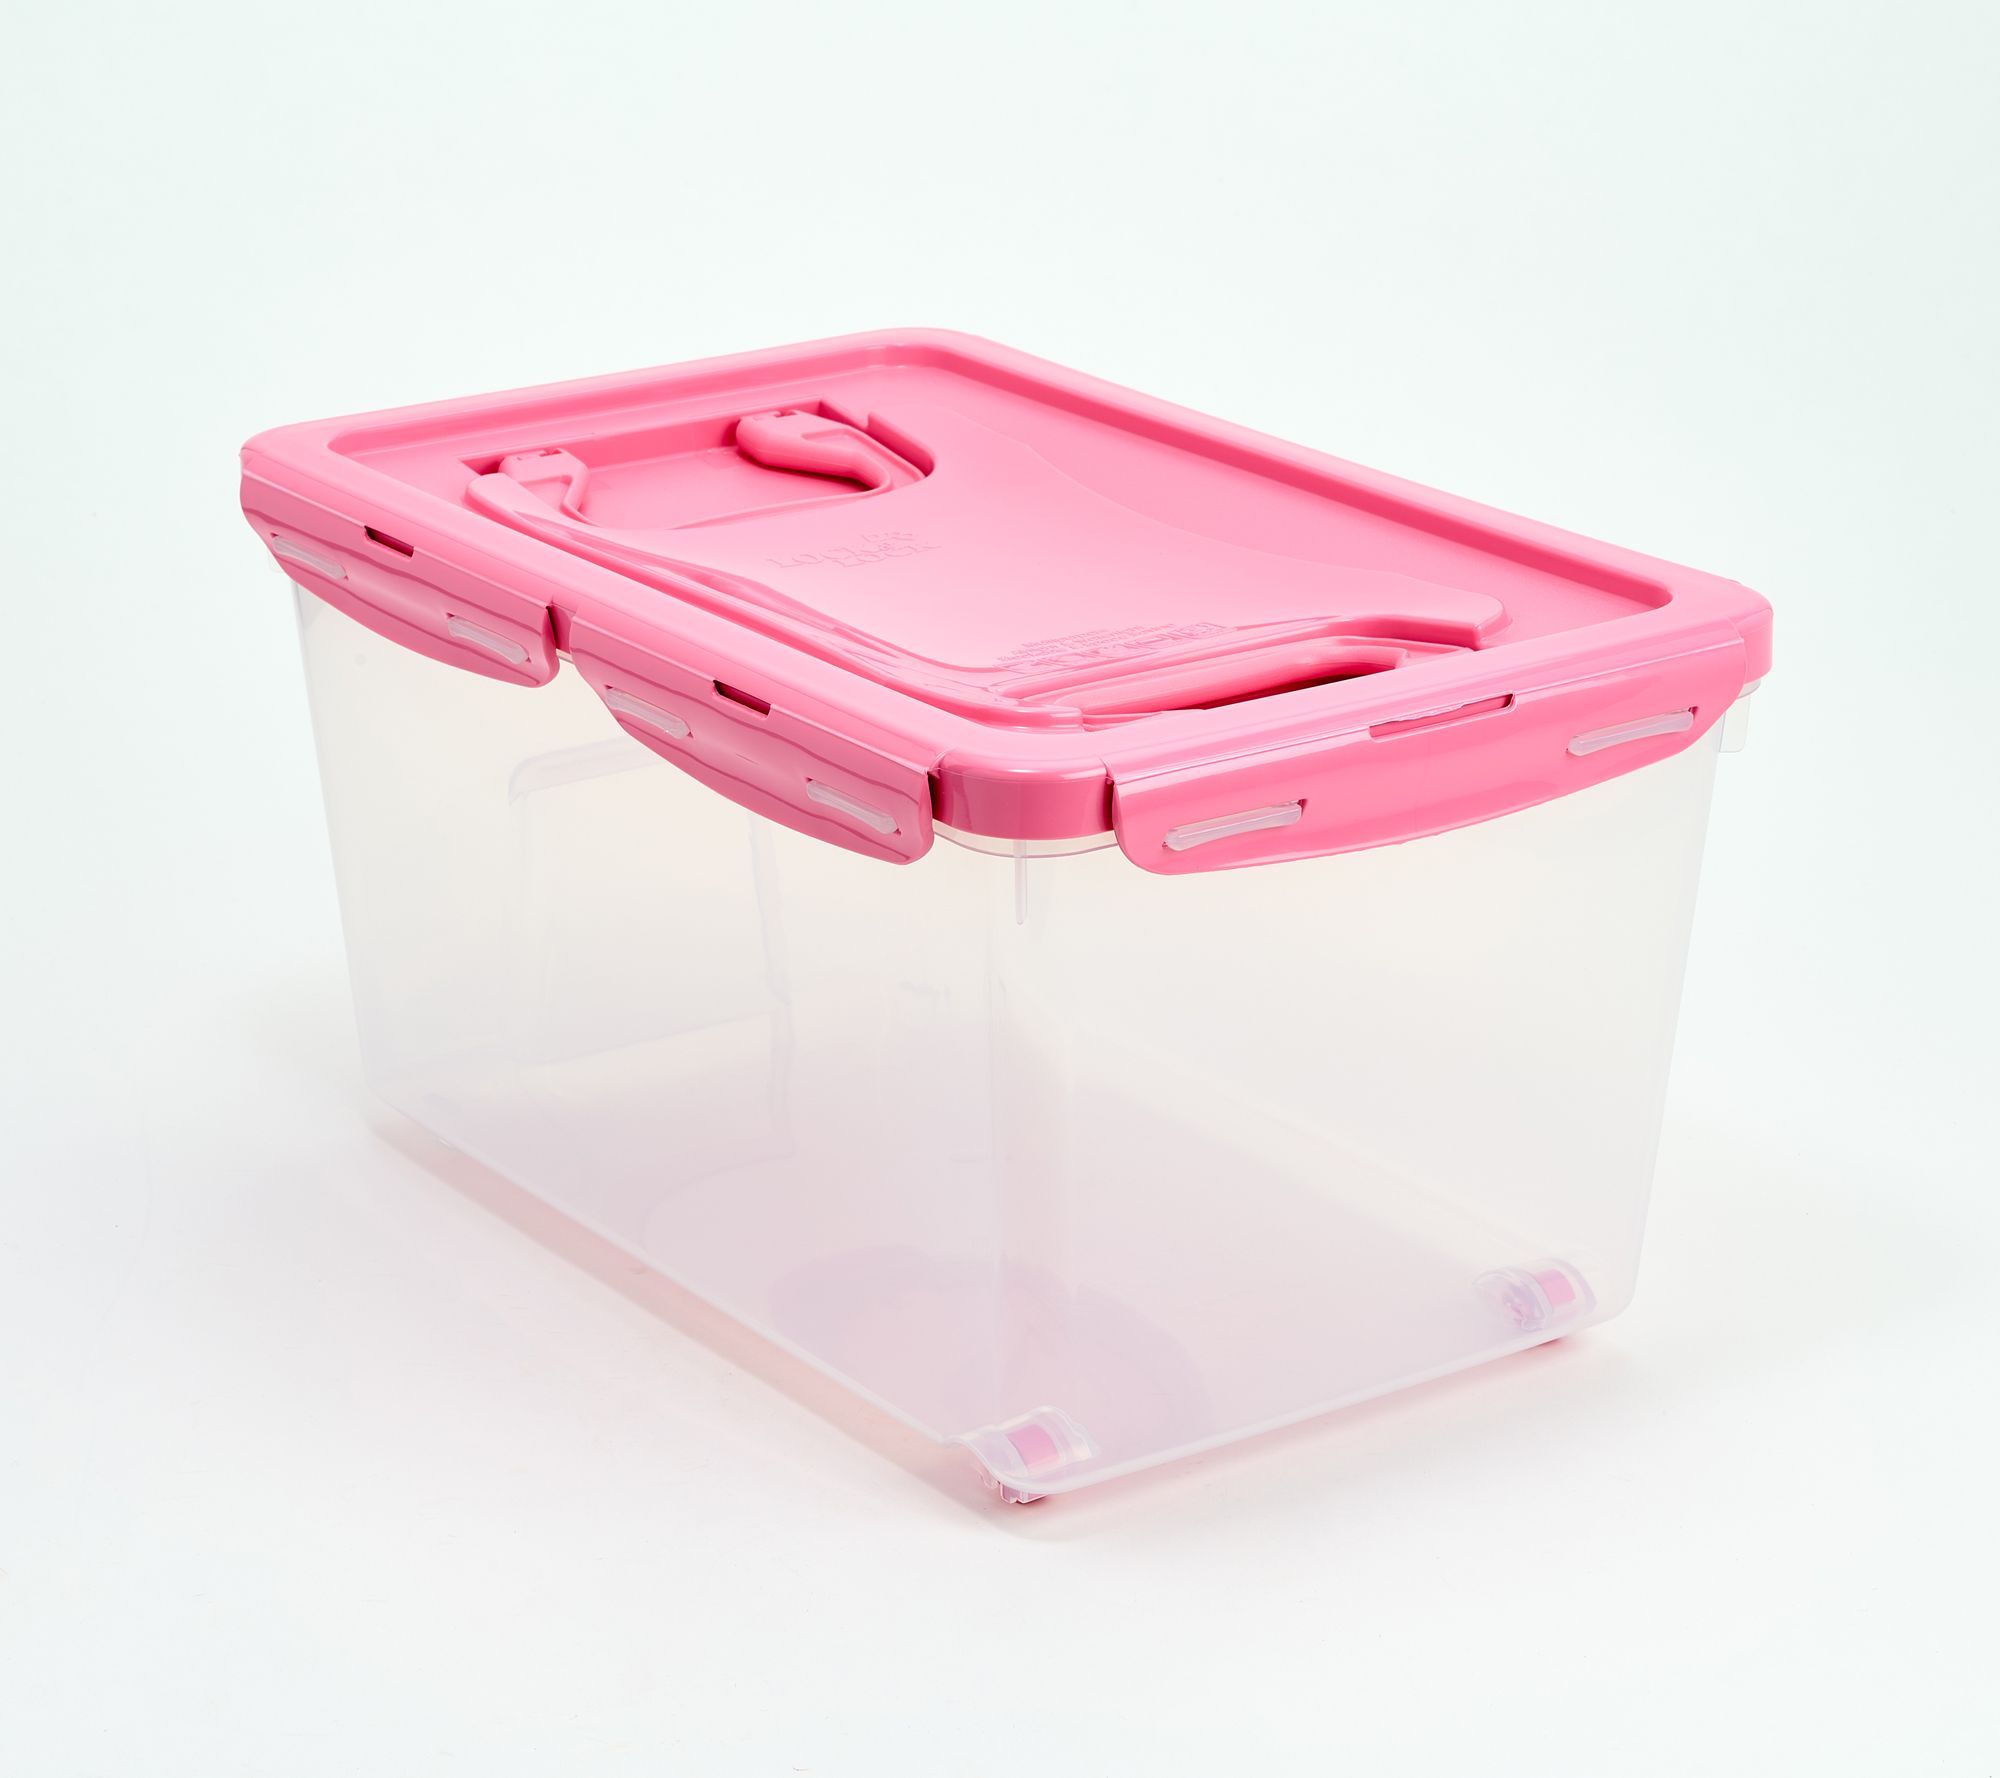 Really Good Stuff Stackable Storage Tubs with Locking Lids, Lg., Red